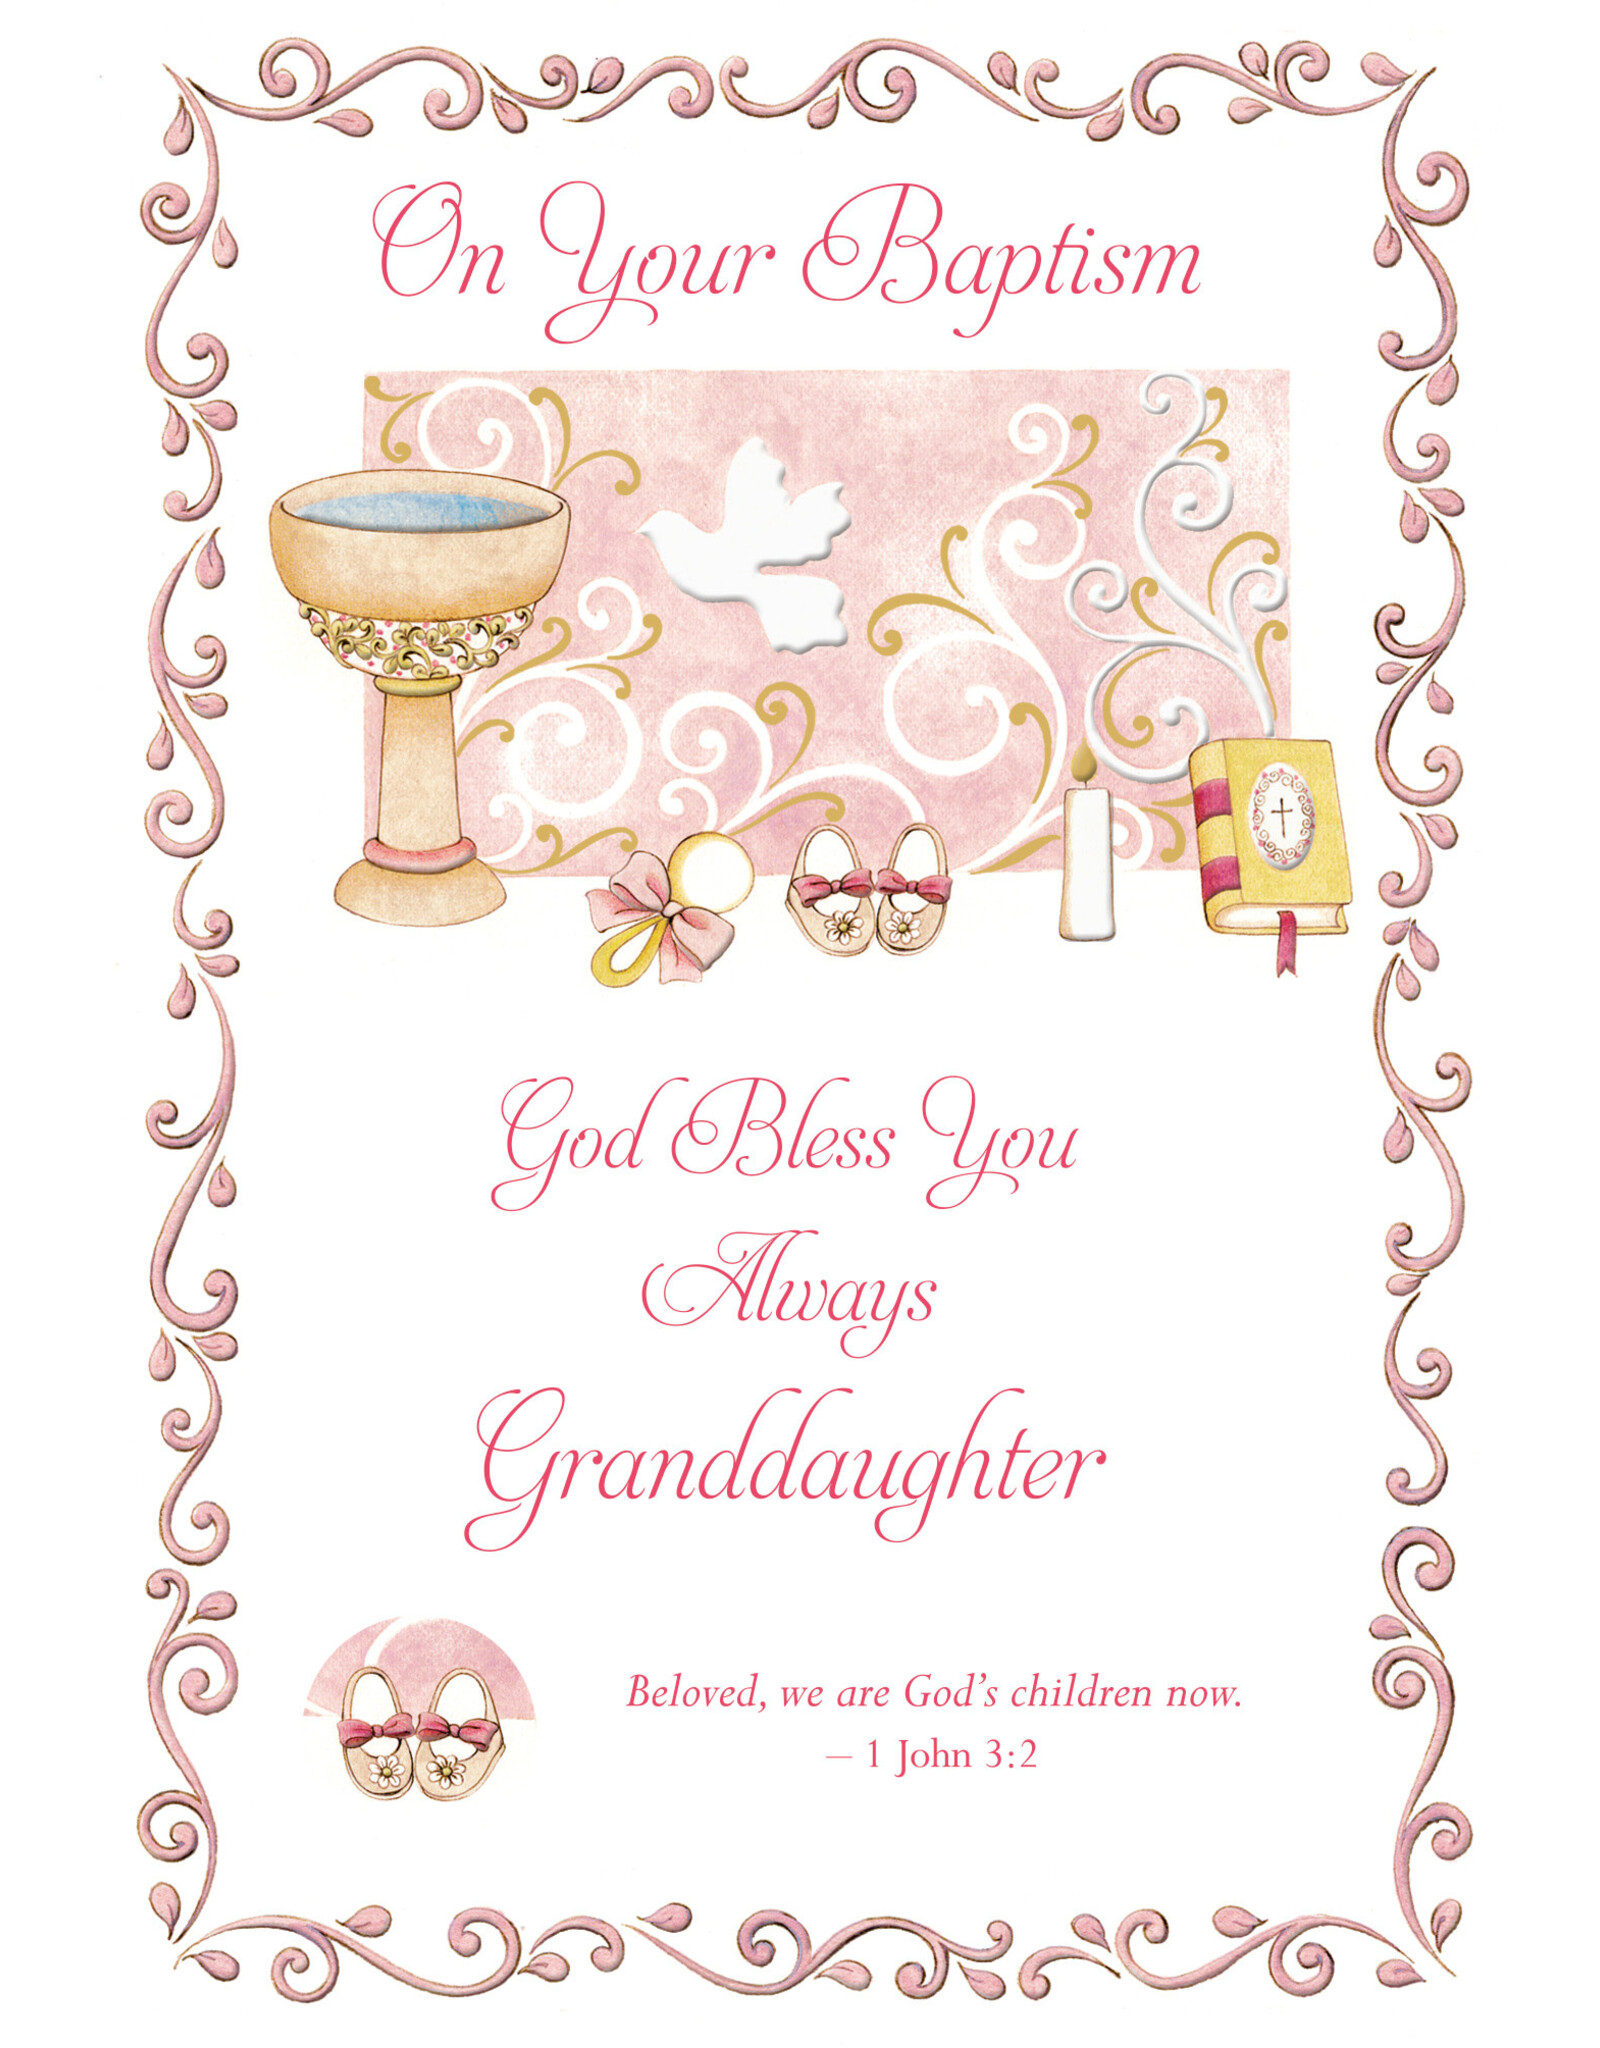 Greetings of Faith Card - Baptism (Granddaughter), God Bless You Always